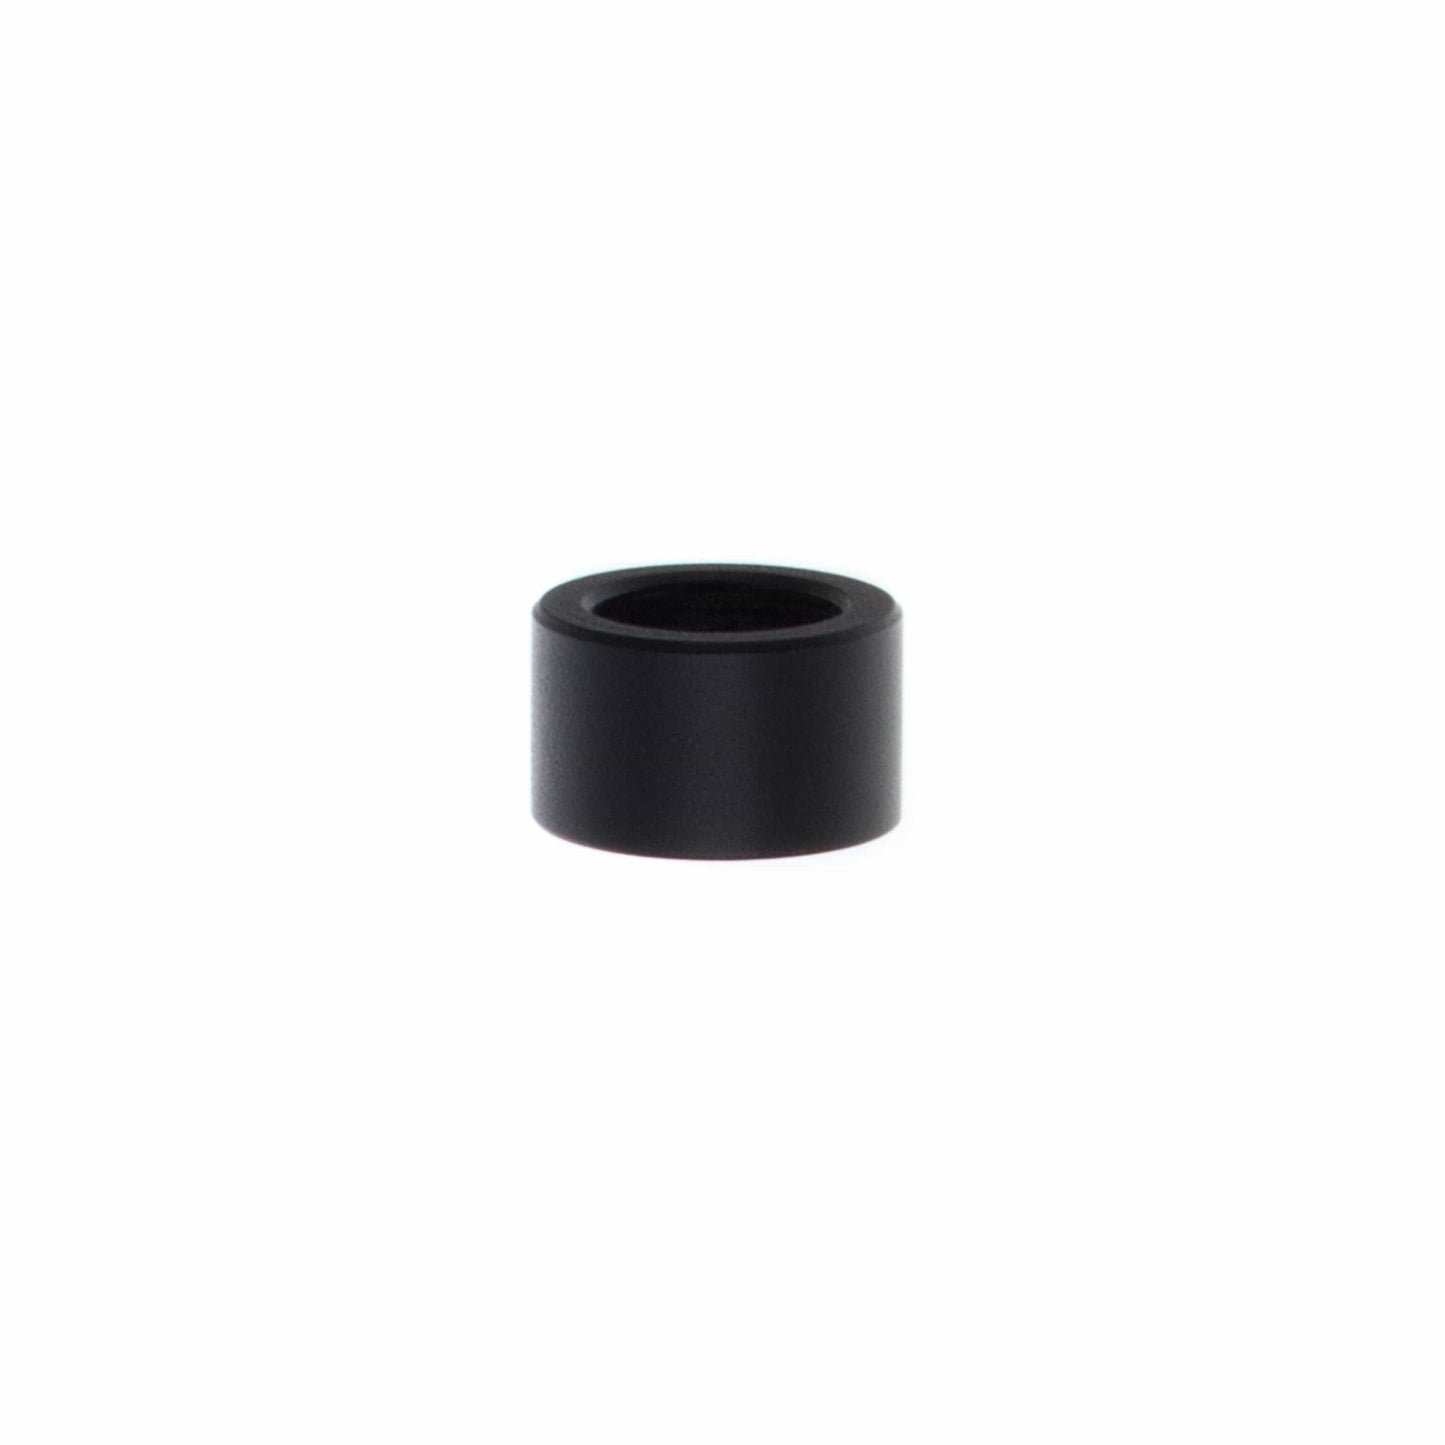 Tubing/Pipe Thread Cover